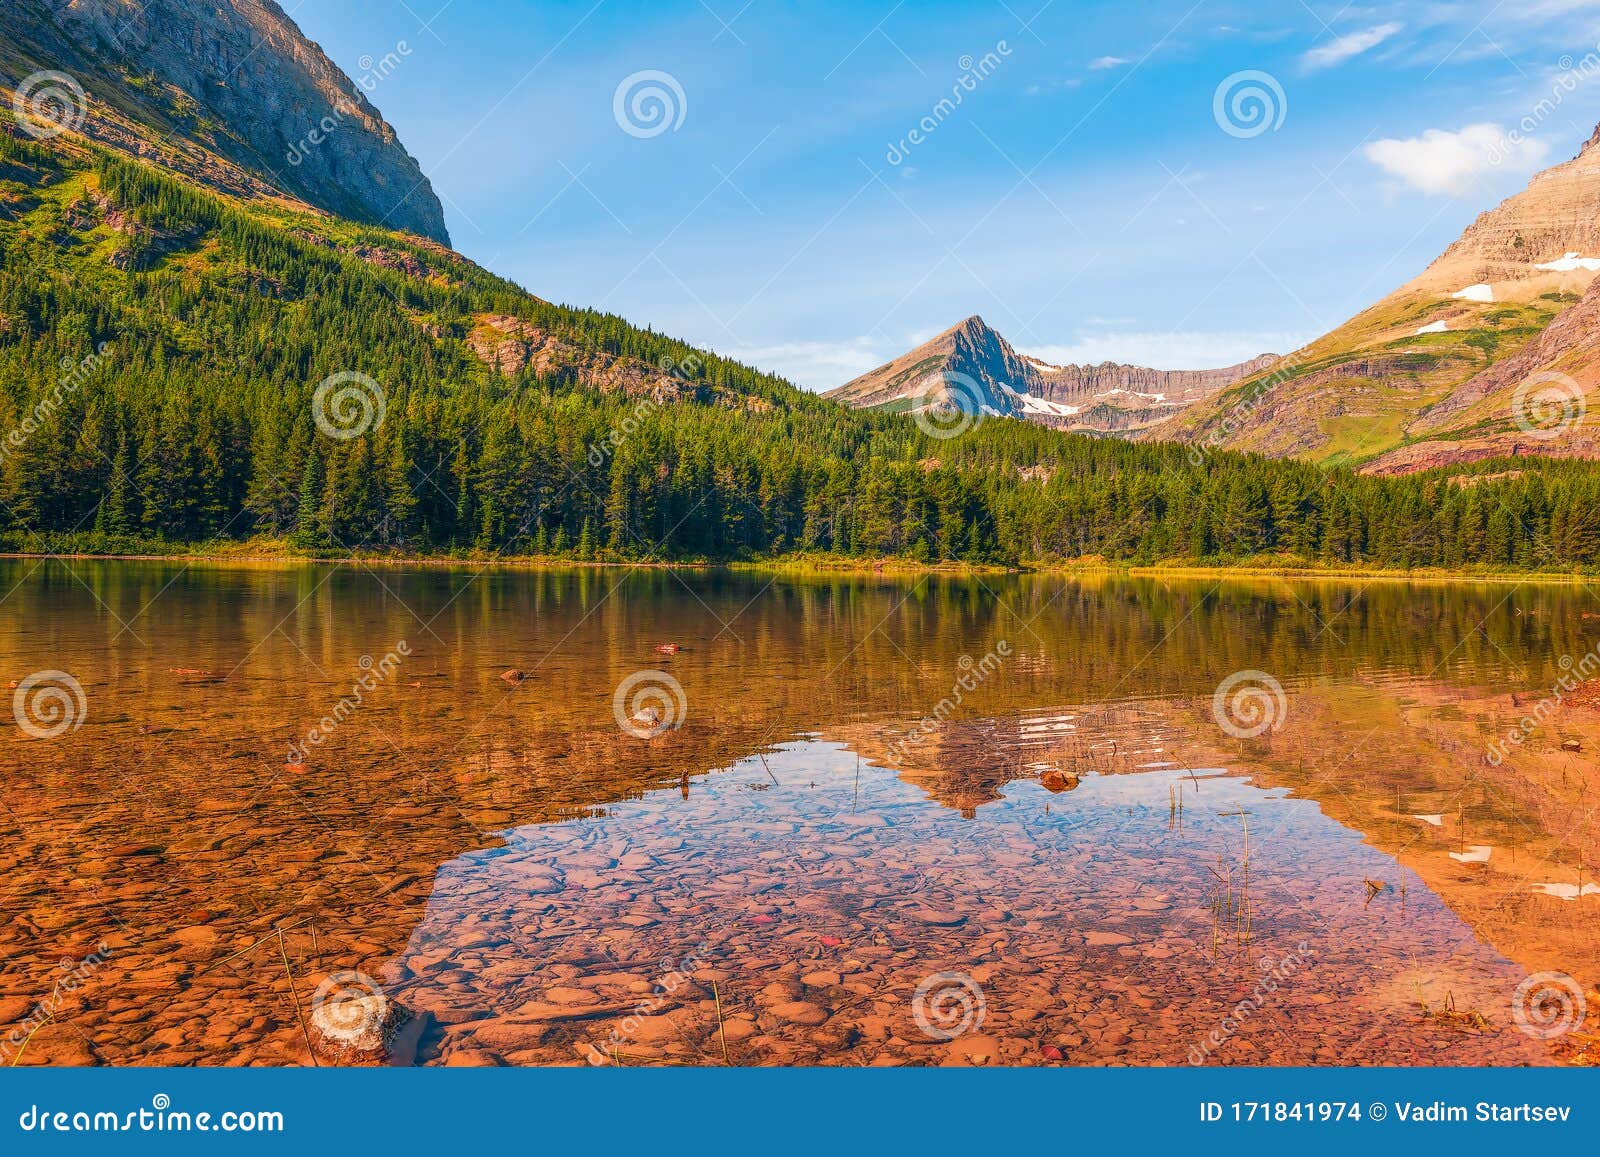 view of fishercap lake and the surrounding mountains in autumn.glacier national park.montana